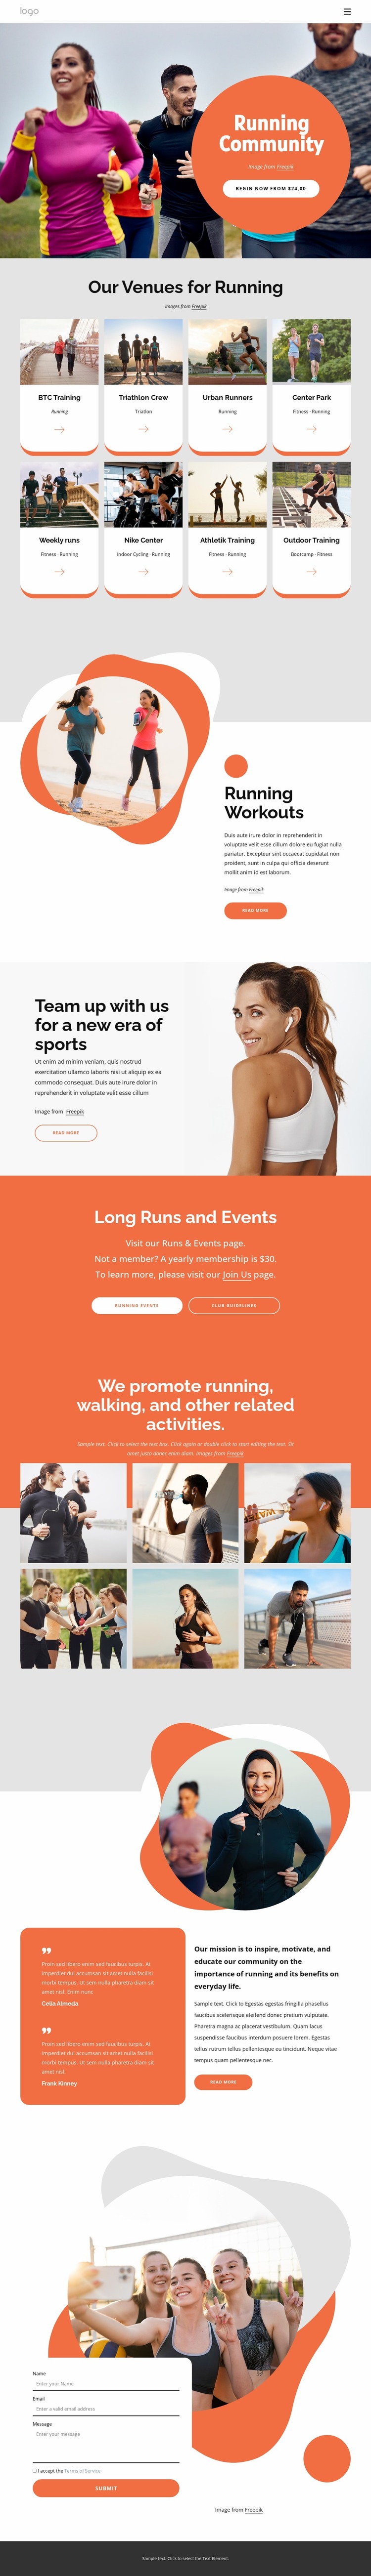 About Running Club Website Mockup